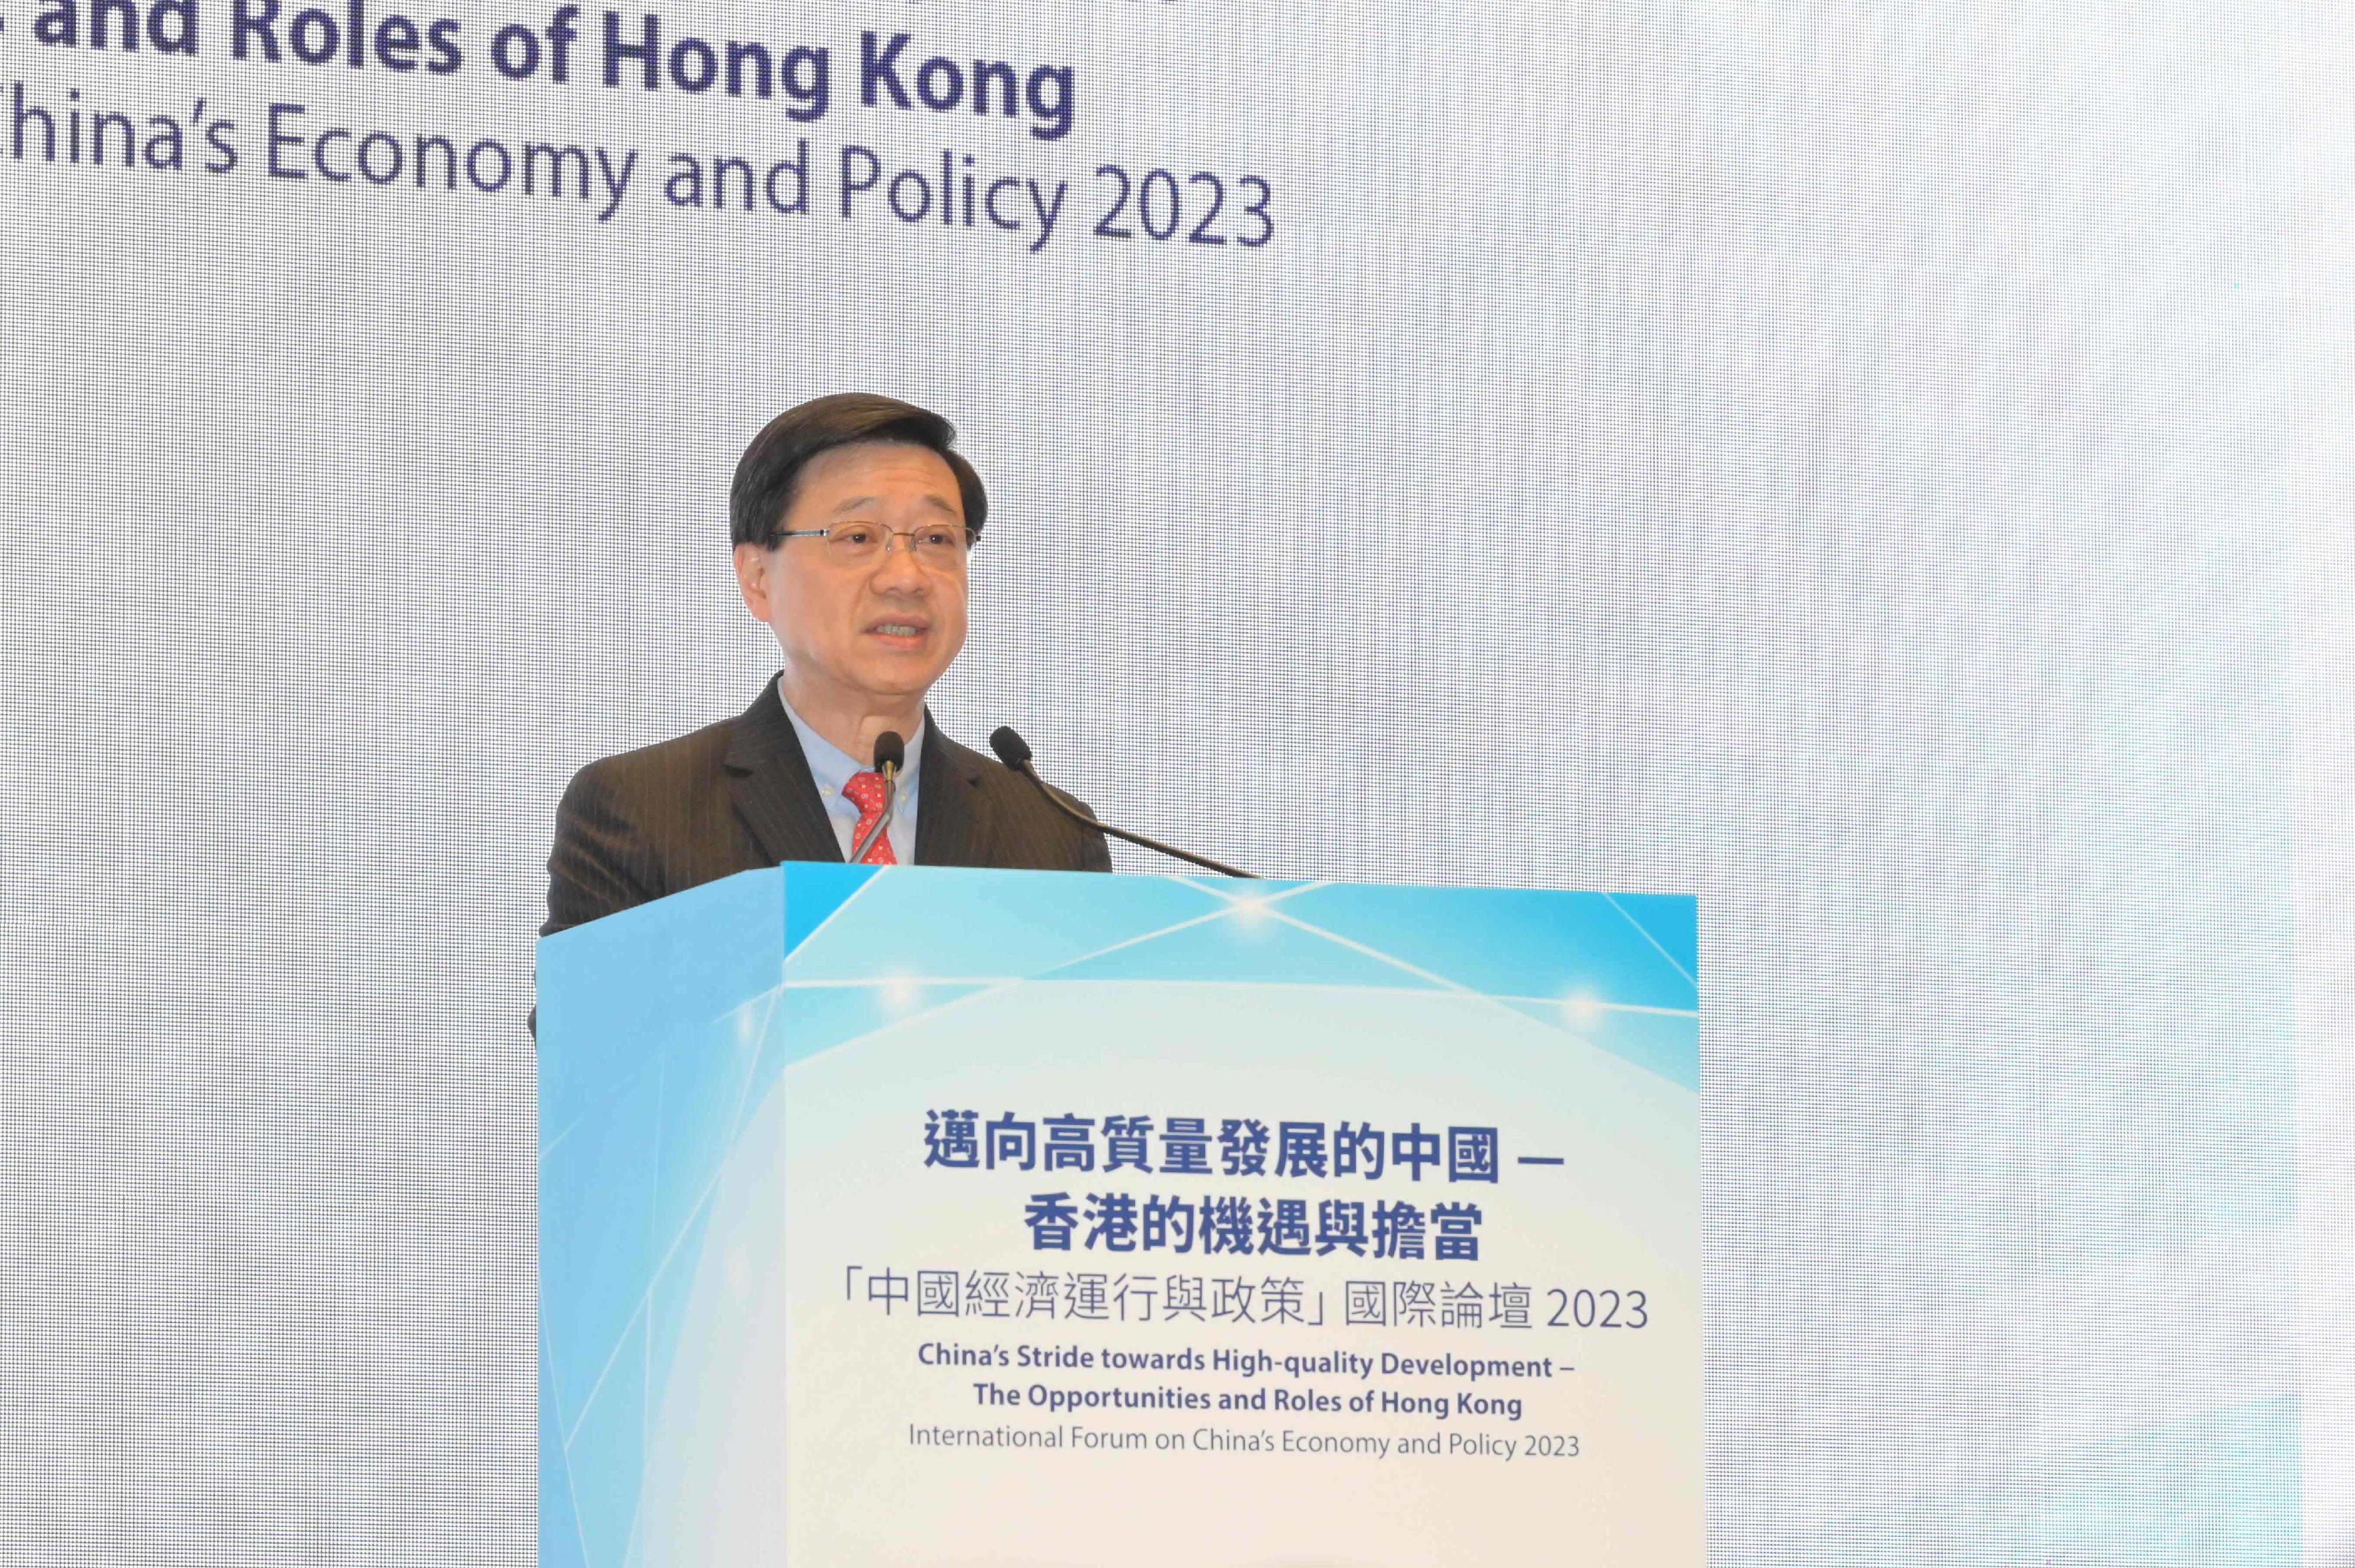 The Chief Executive, Mr John Lee, speaks at China’s Stride towards High-quality Development - The Opportunities and Roles of Hong Kong International Forum on China's Economy and Policy 2023 today (November 15).
